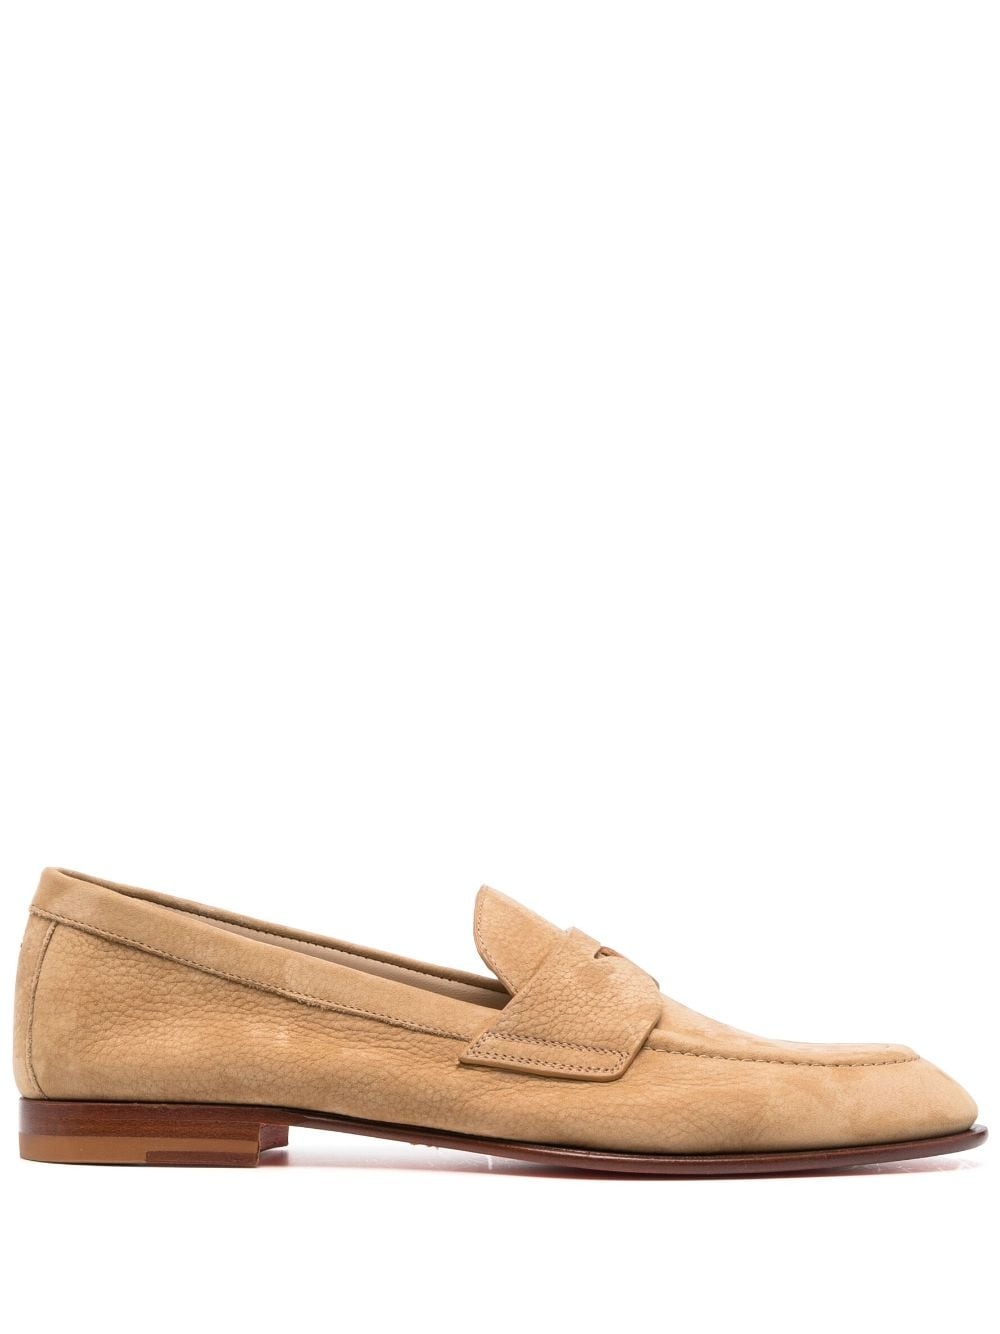 suede penny loafers - 1